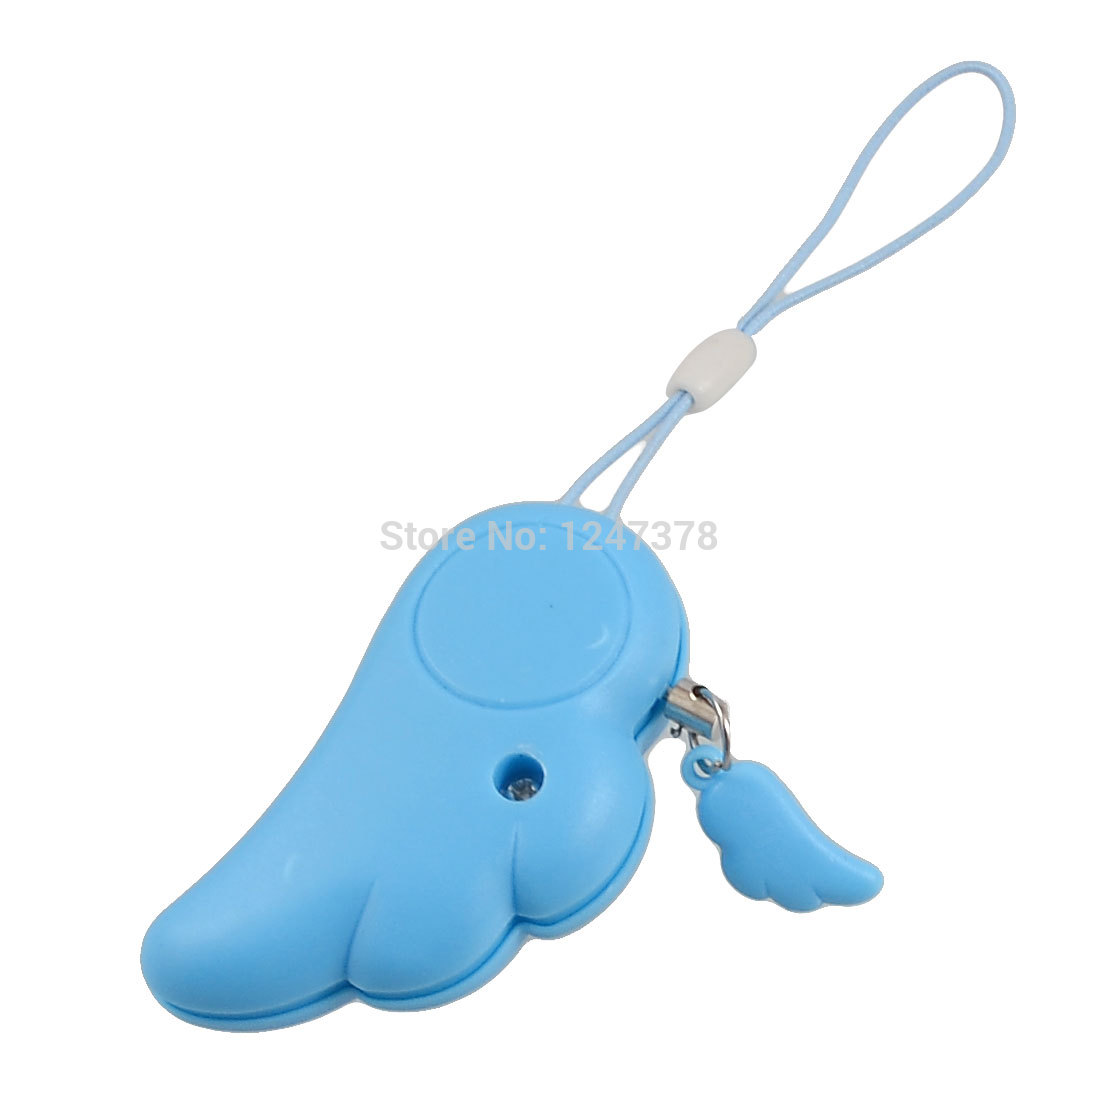 Blue Personal Guardian Angel Style Self Protection Alarm for Mobile Phone